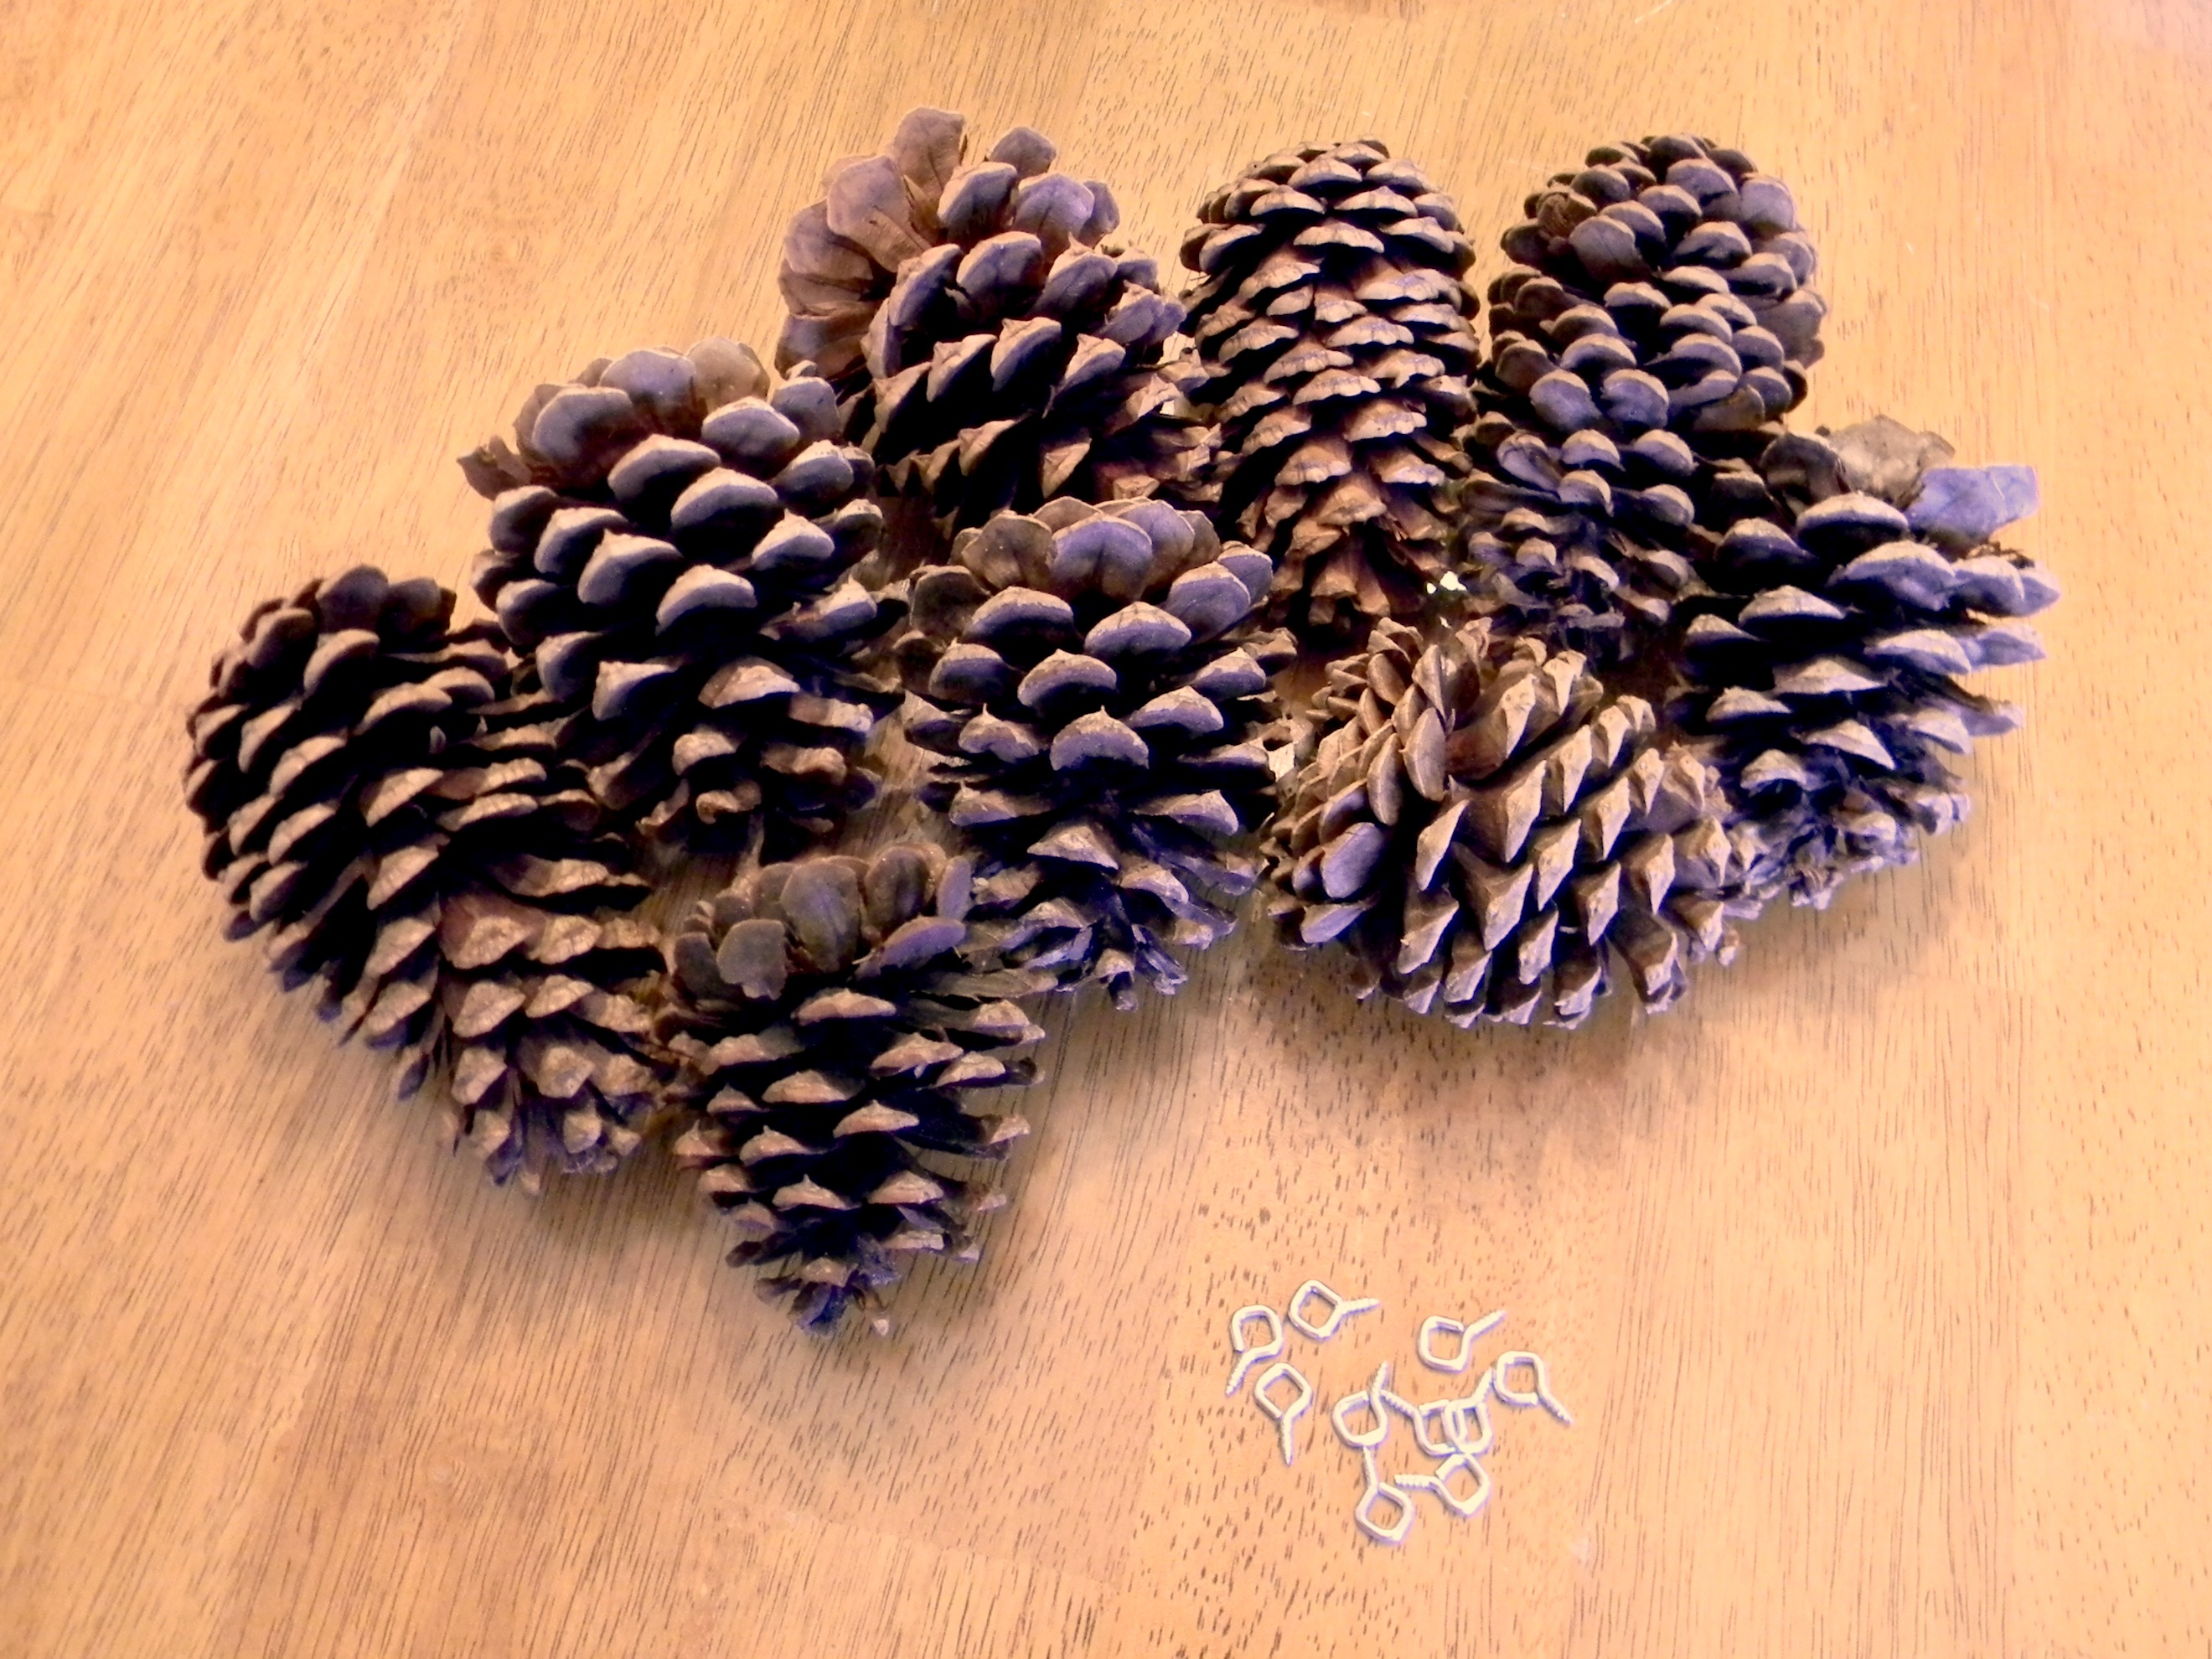 Pinecone Garland - Organize and Decorate Everything